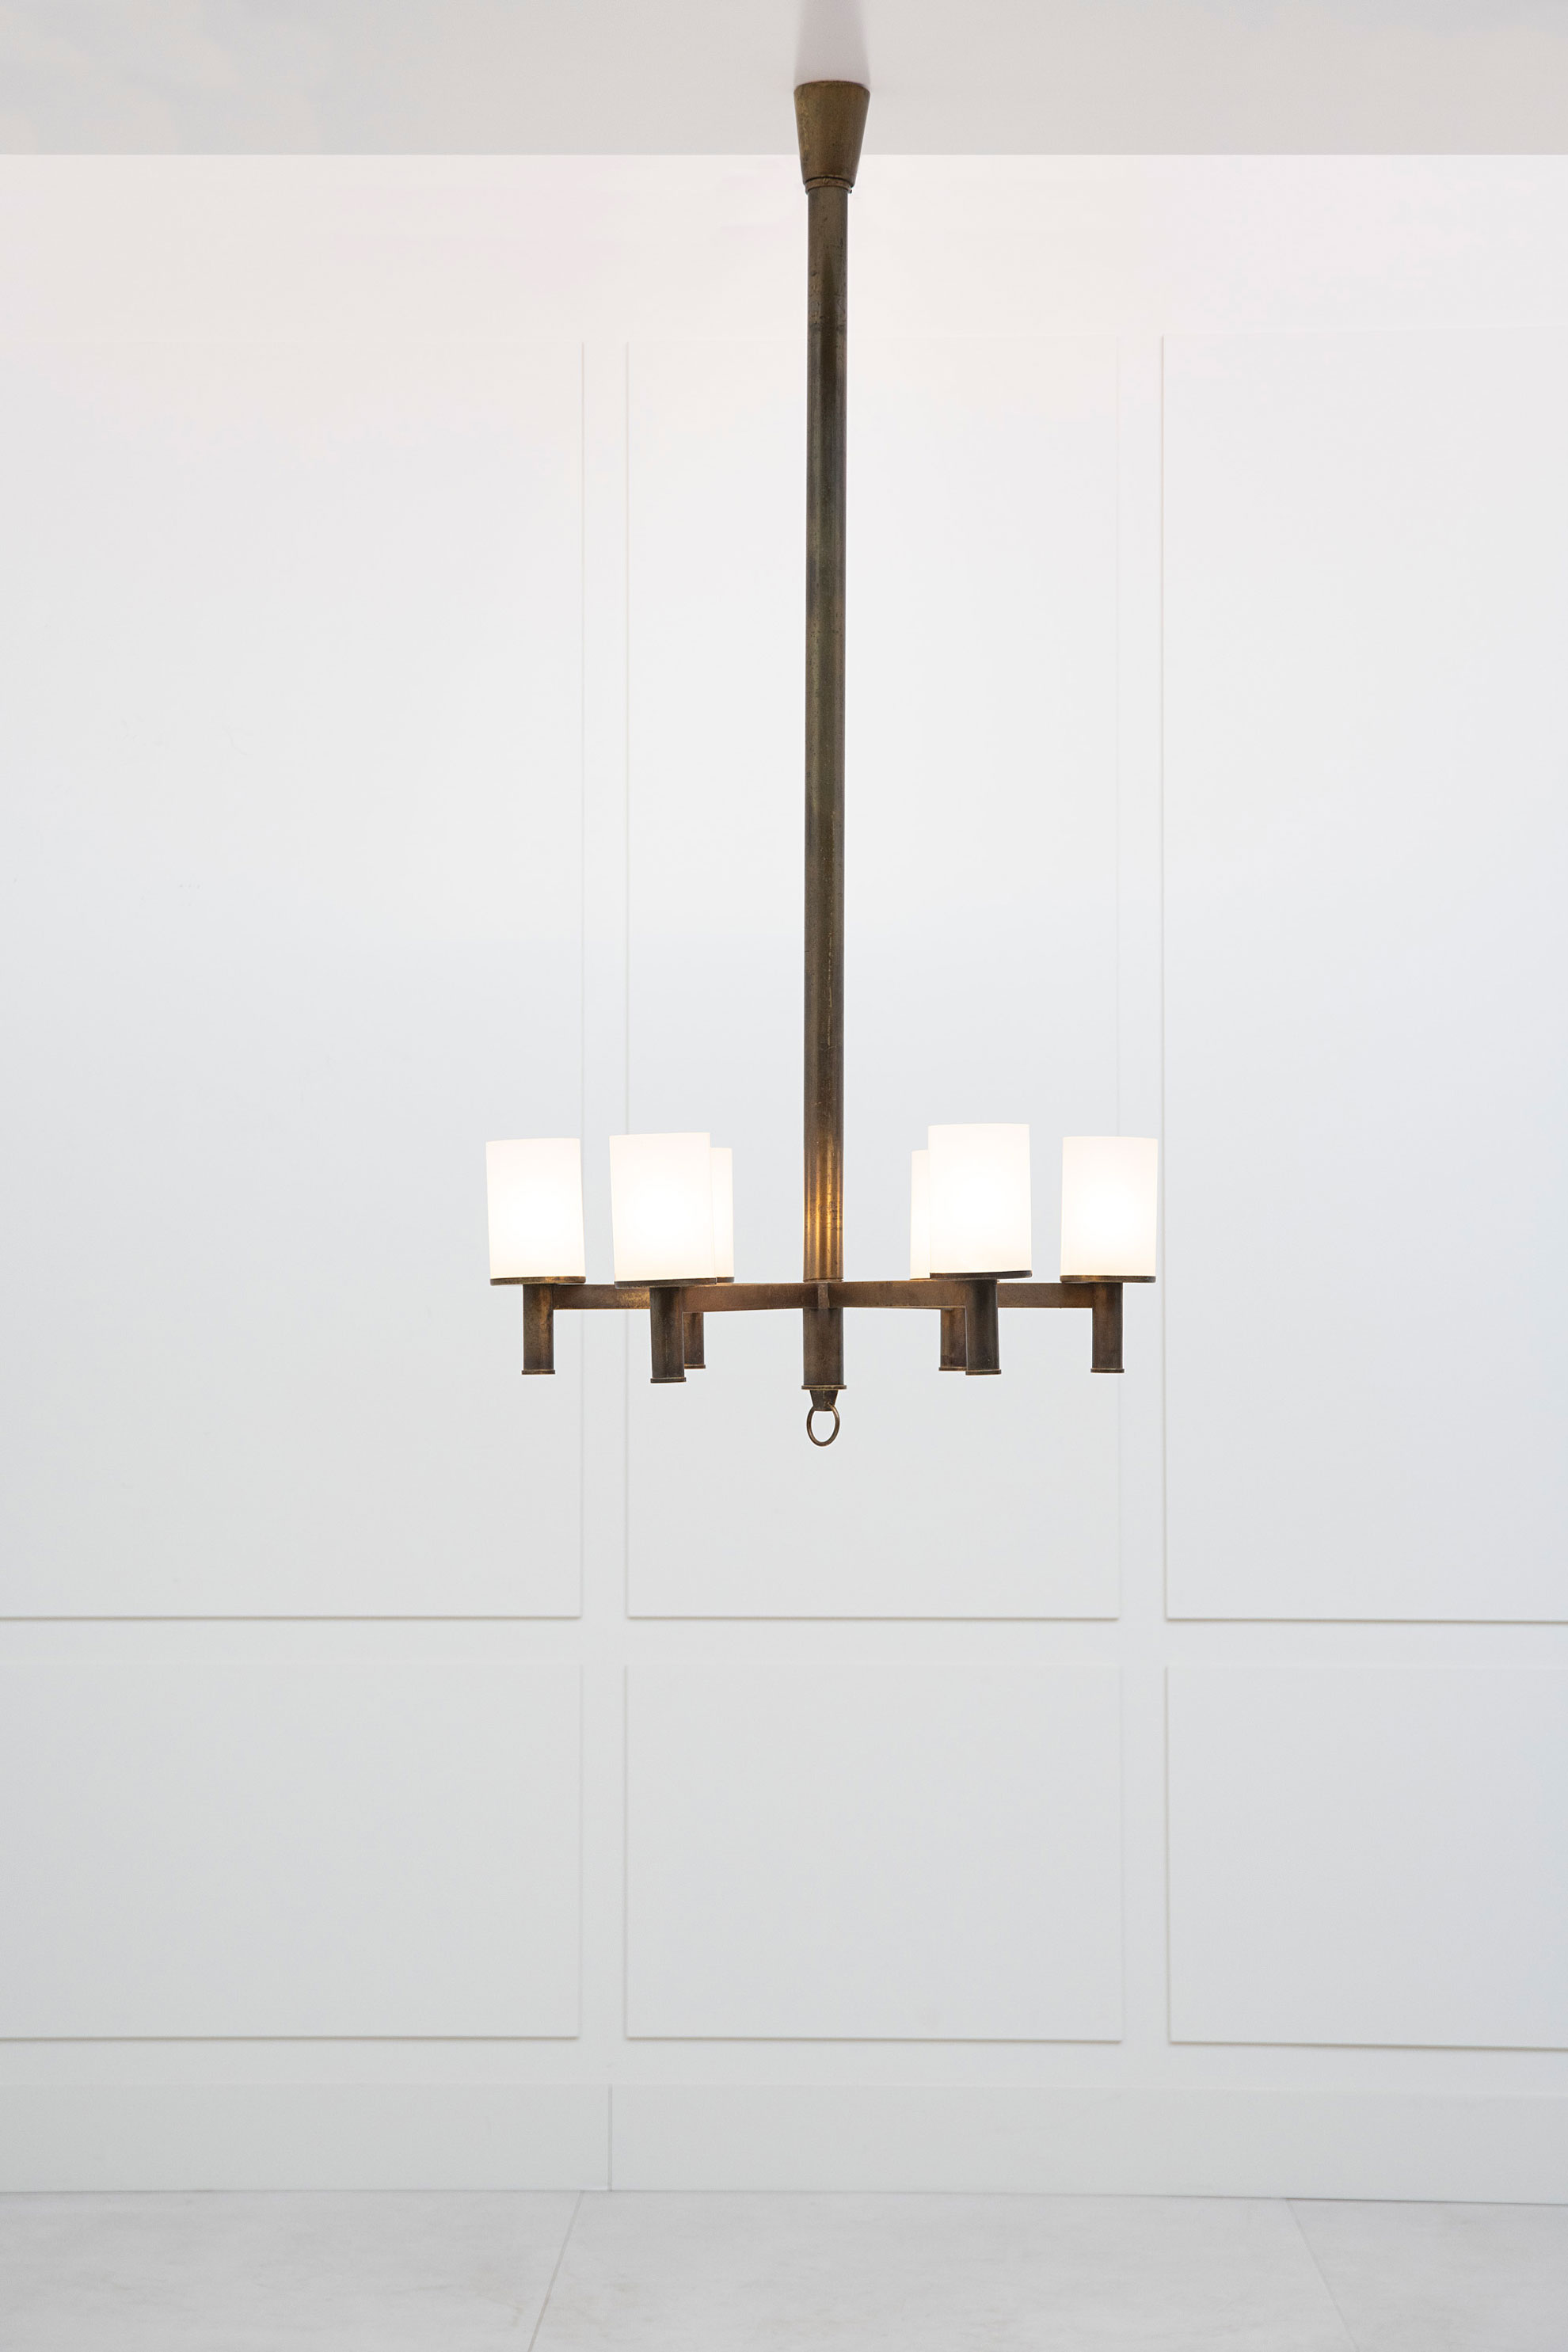 Jacques Quinet, Ceiling lamp with 6 lights, vue 01